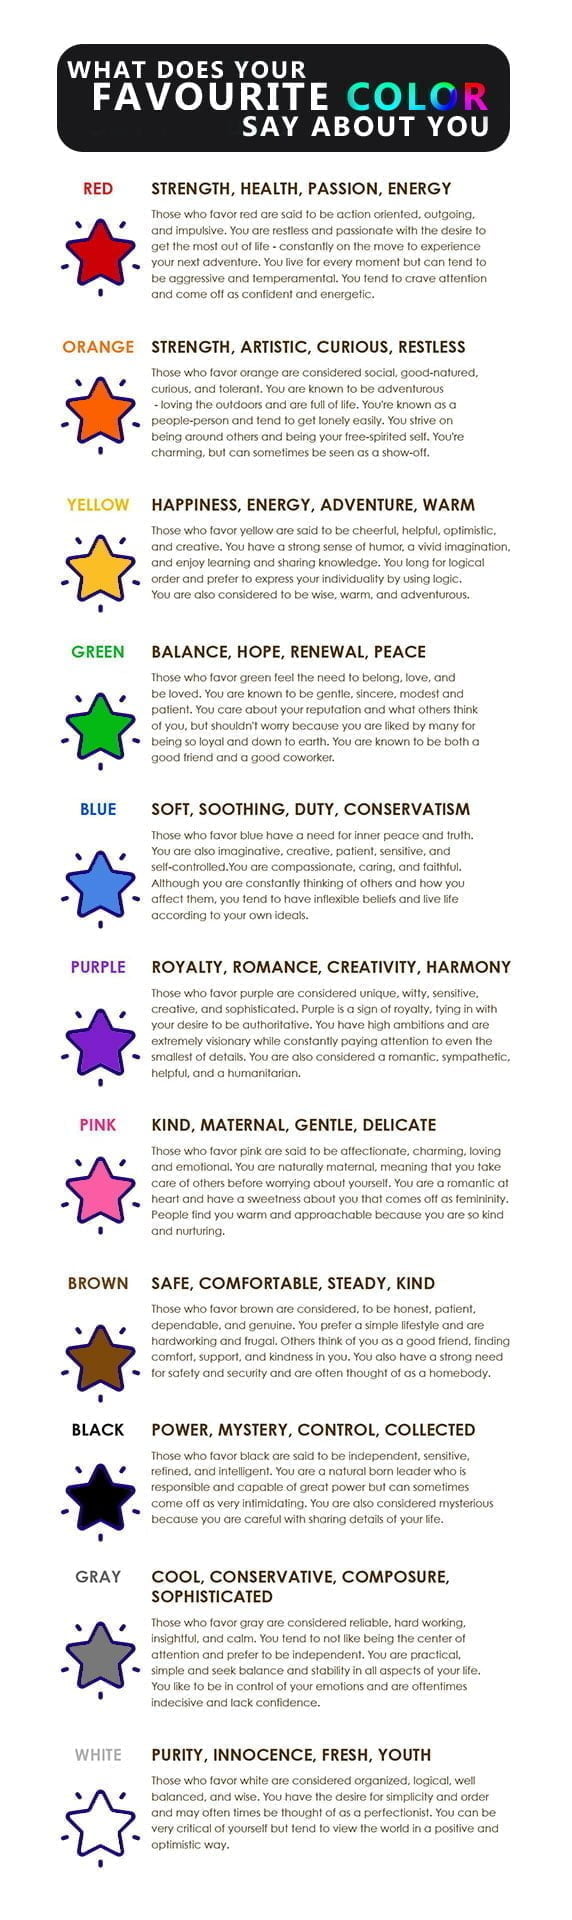 what-does-your-favorite-color-say-about-you-color-psychology-info-graphic